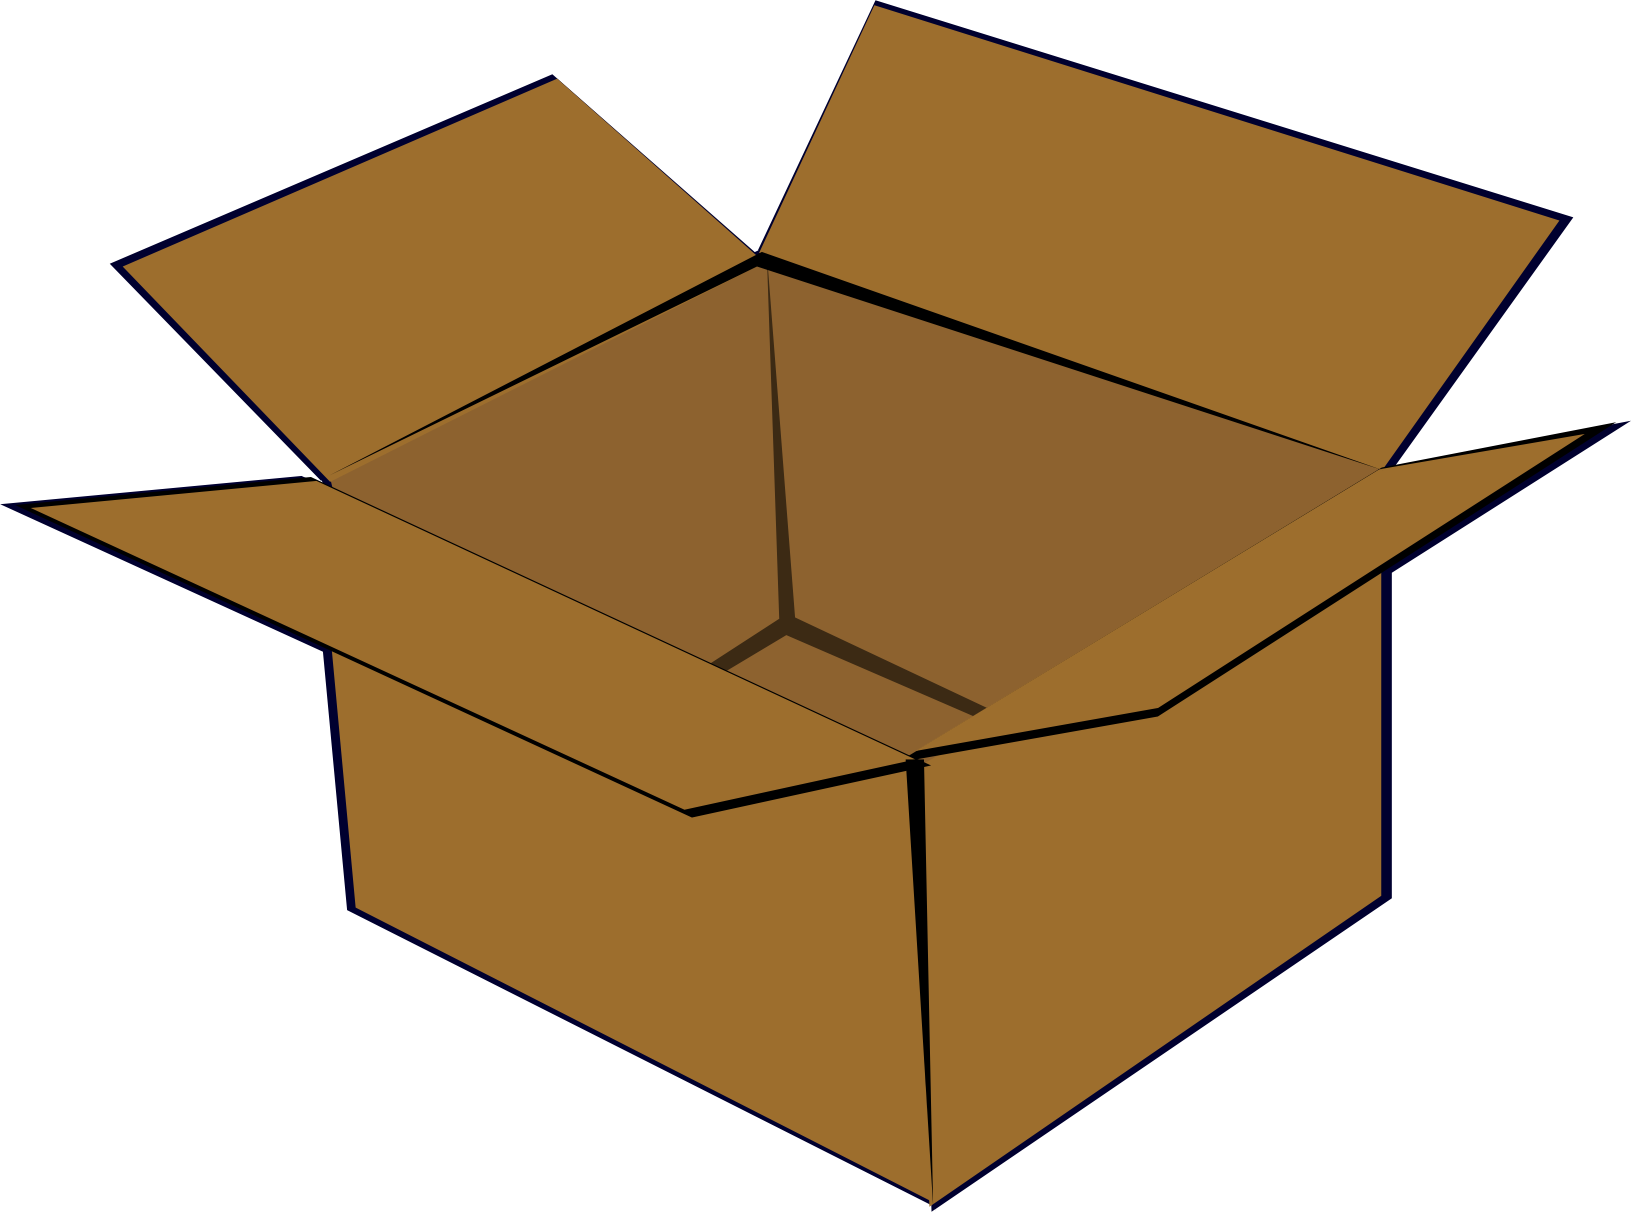 Big image png. Boxes clipart cardboard box